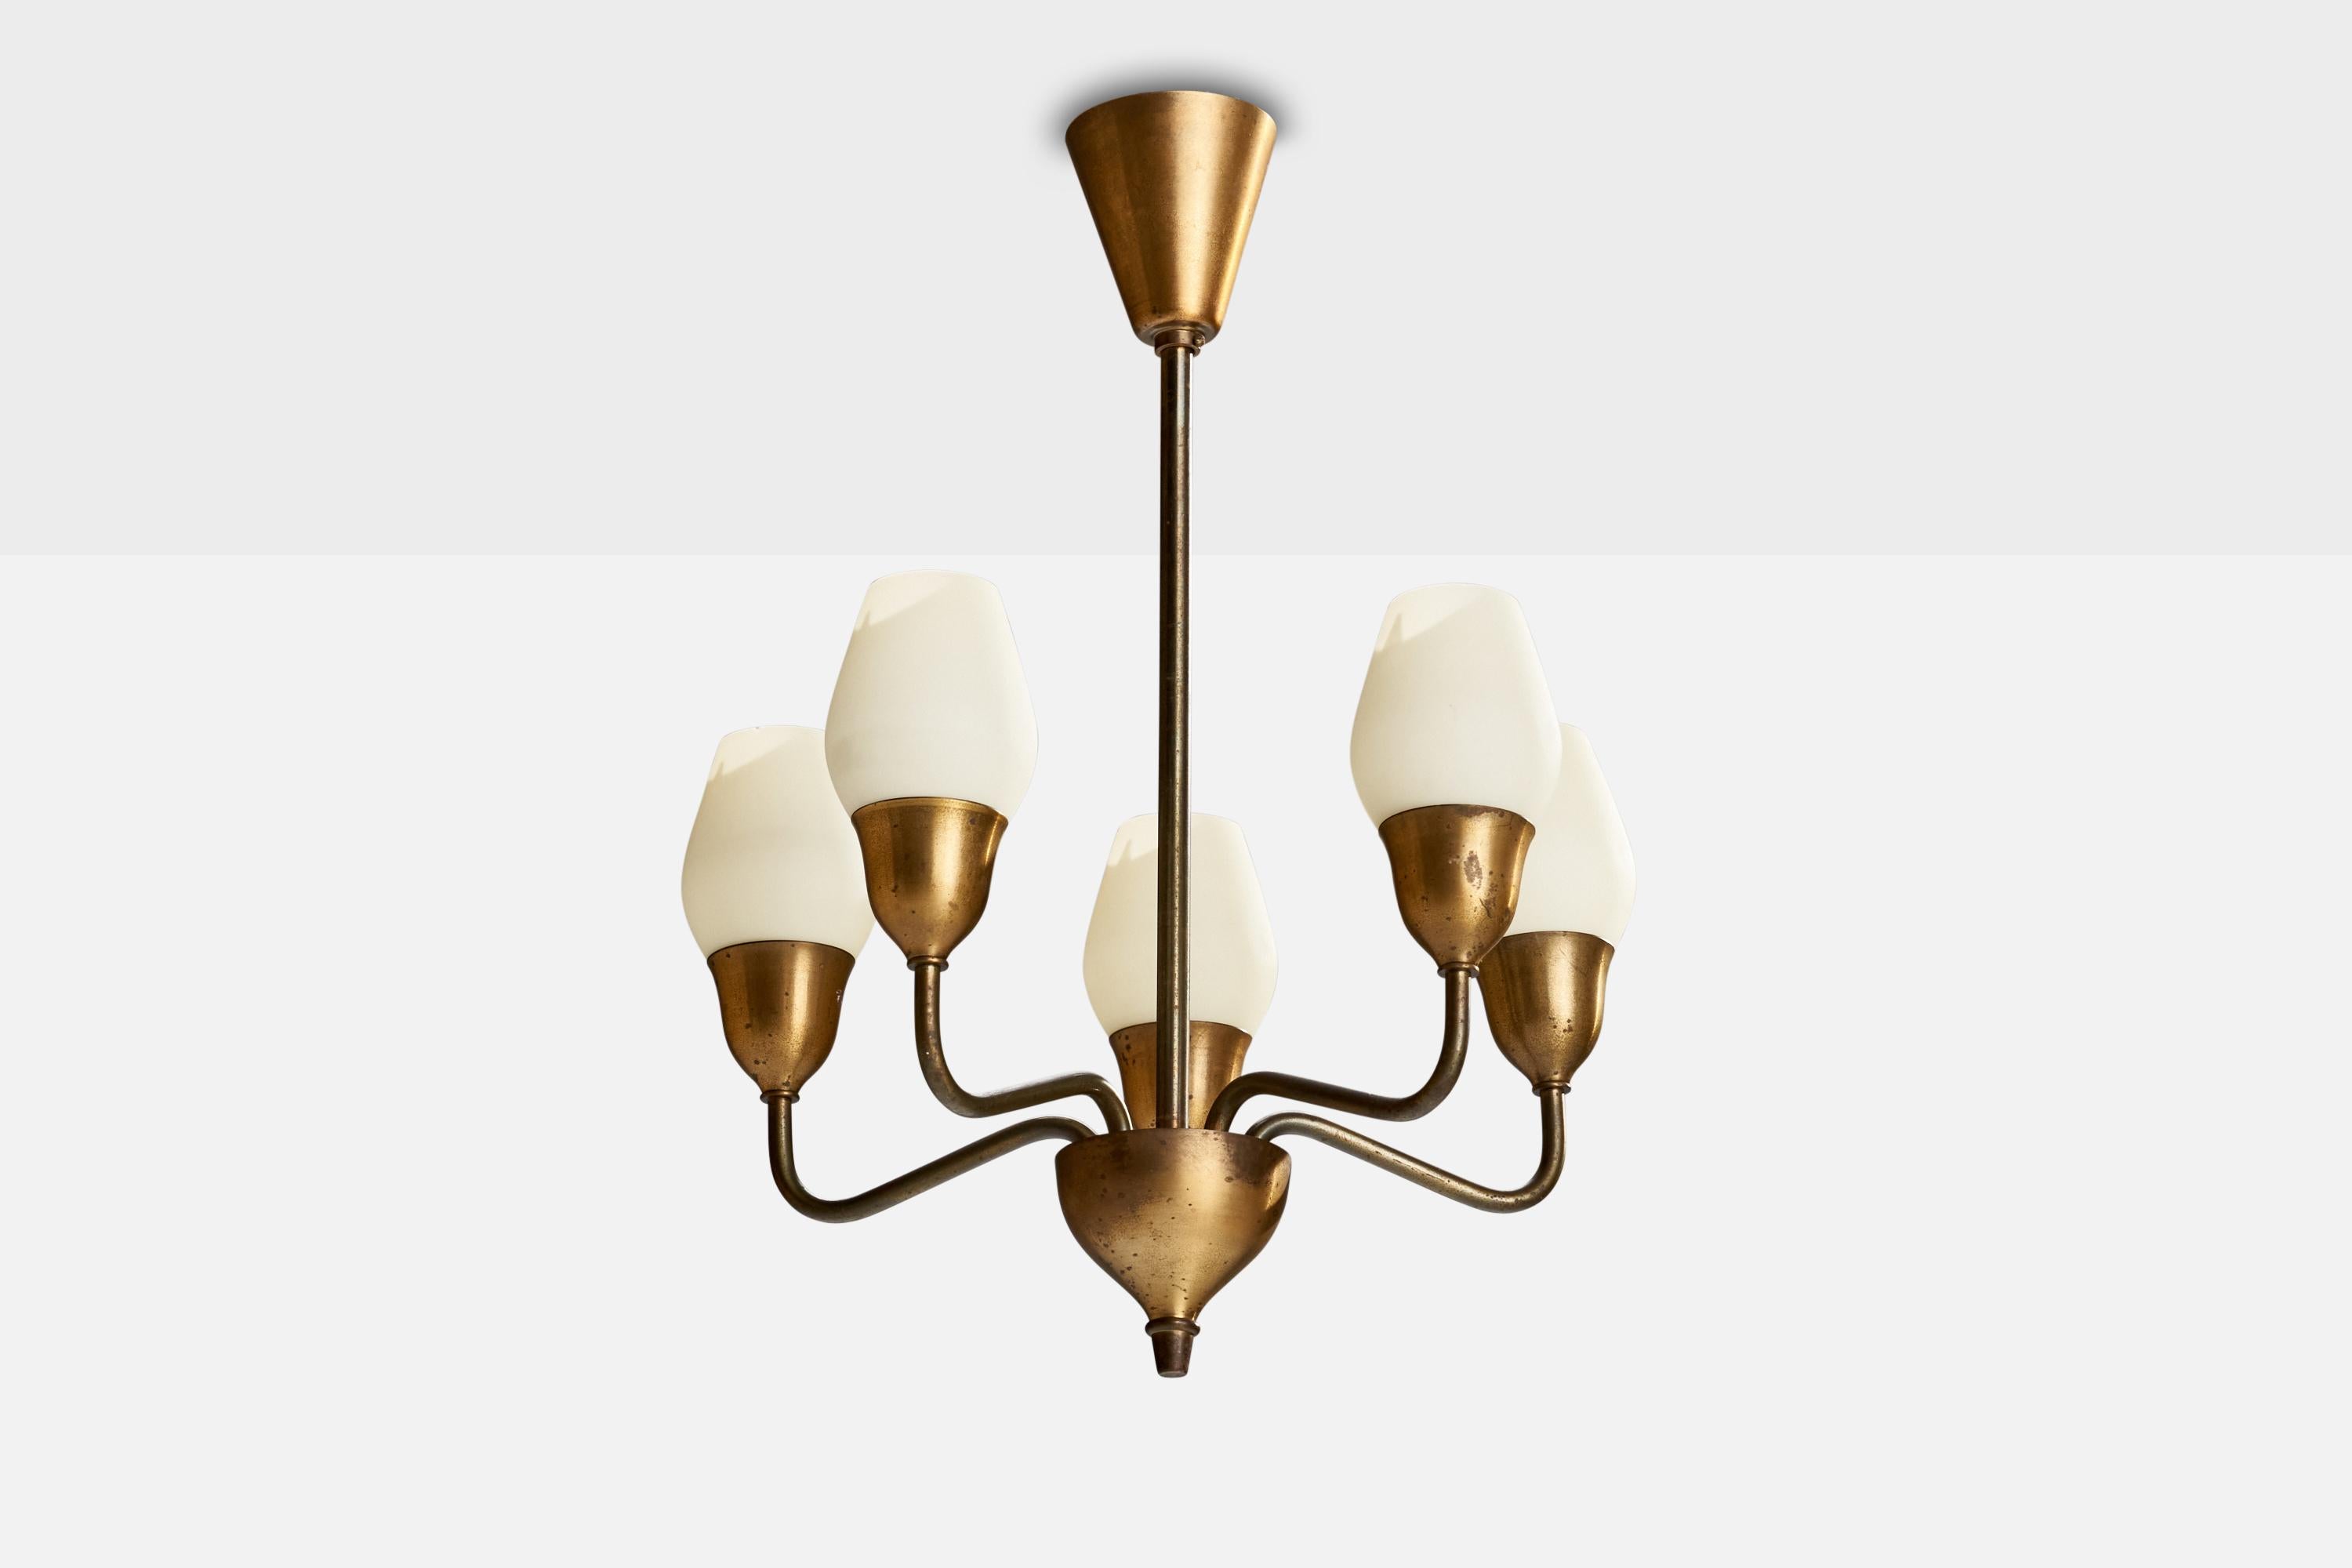 A brass and glass chandelier designed and produced by Fog & Mørup, Denmark, 1940s.

Dimensions of canopy (inches): 4” H x 3..5” Diameter
Socket takes standard E-14 bulbs. 5 socket.There is no maximum wattage stated on the fixture. All lighting will